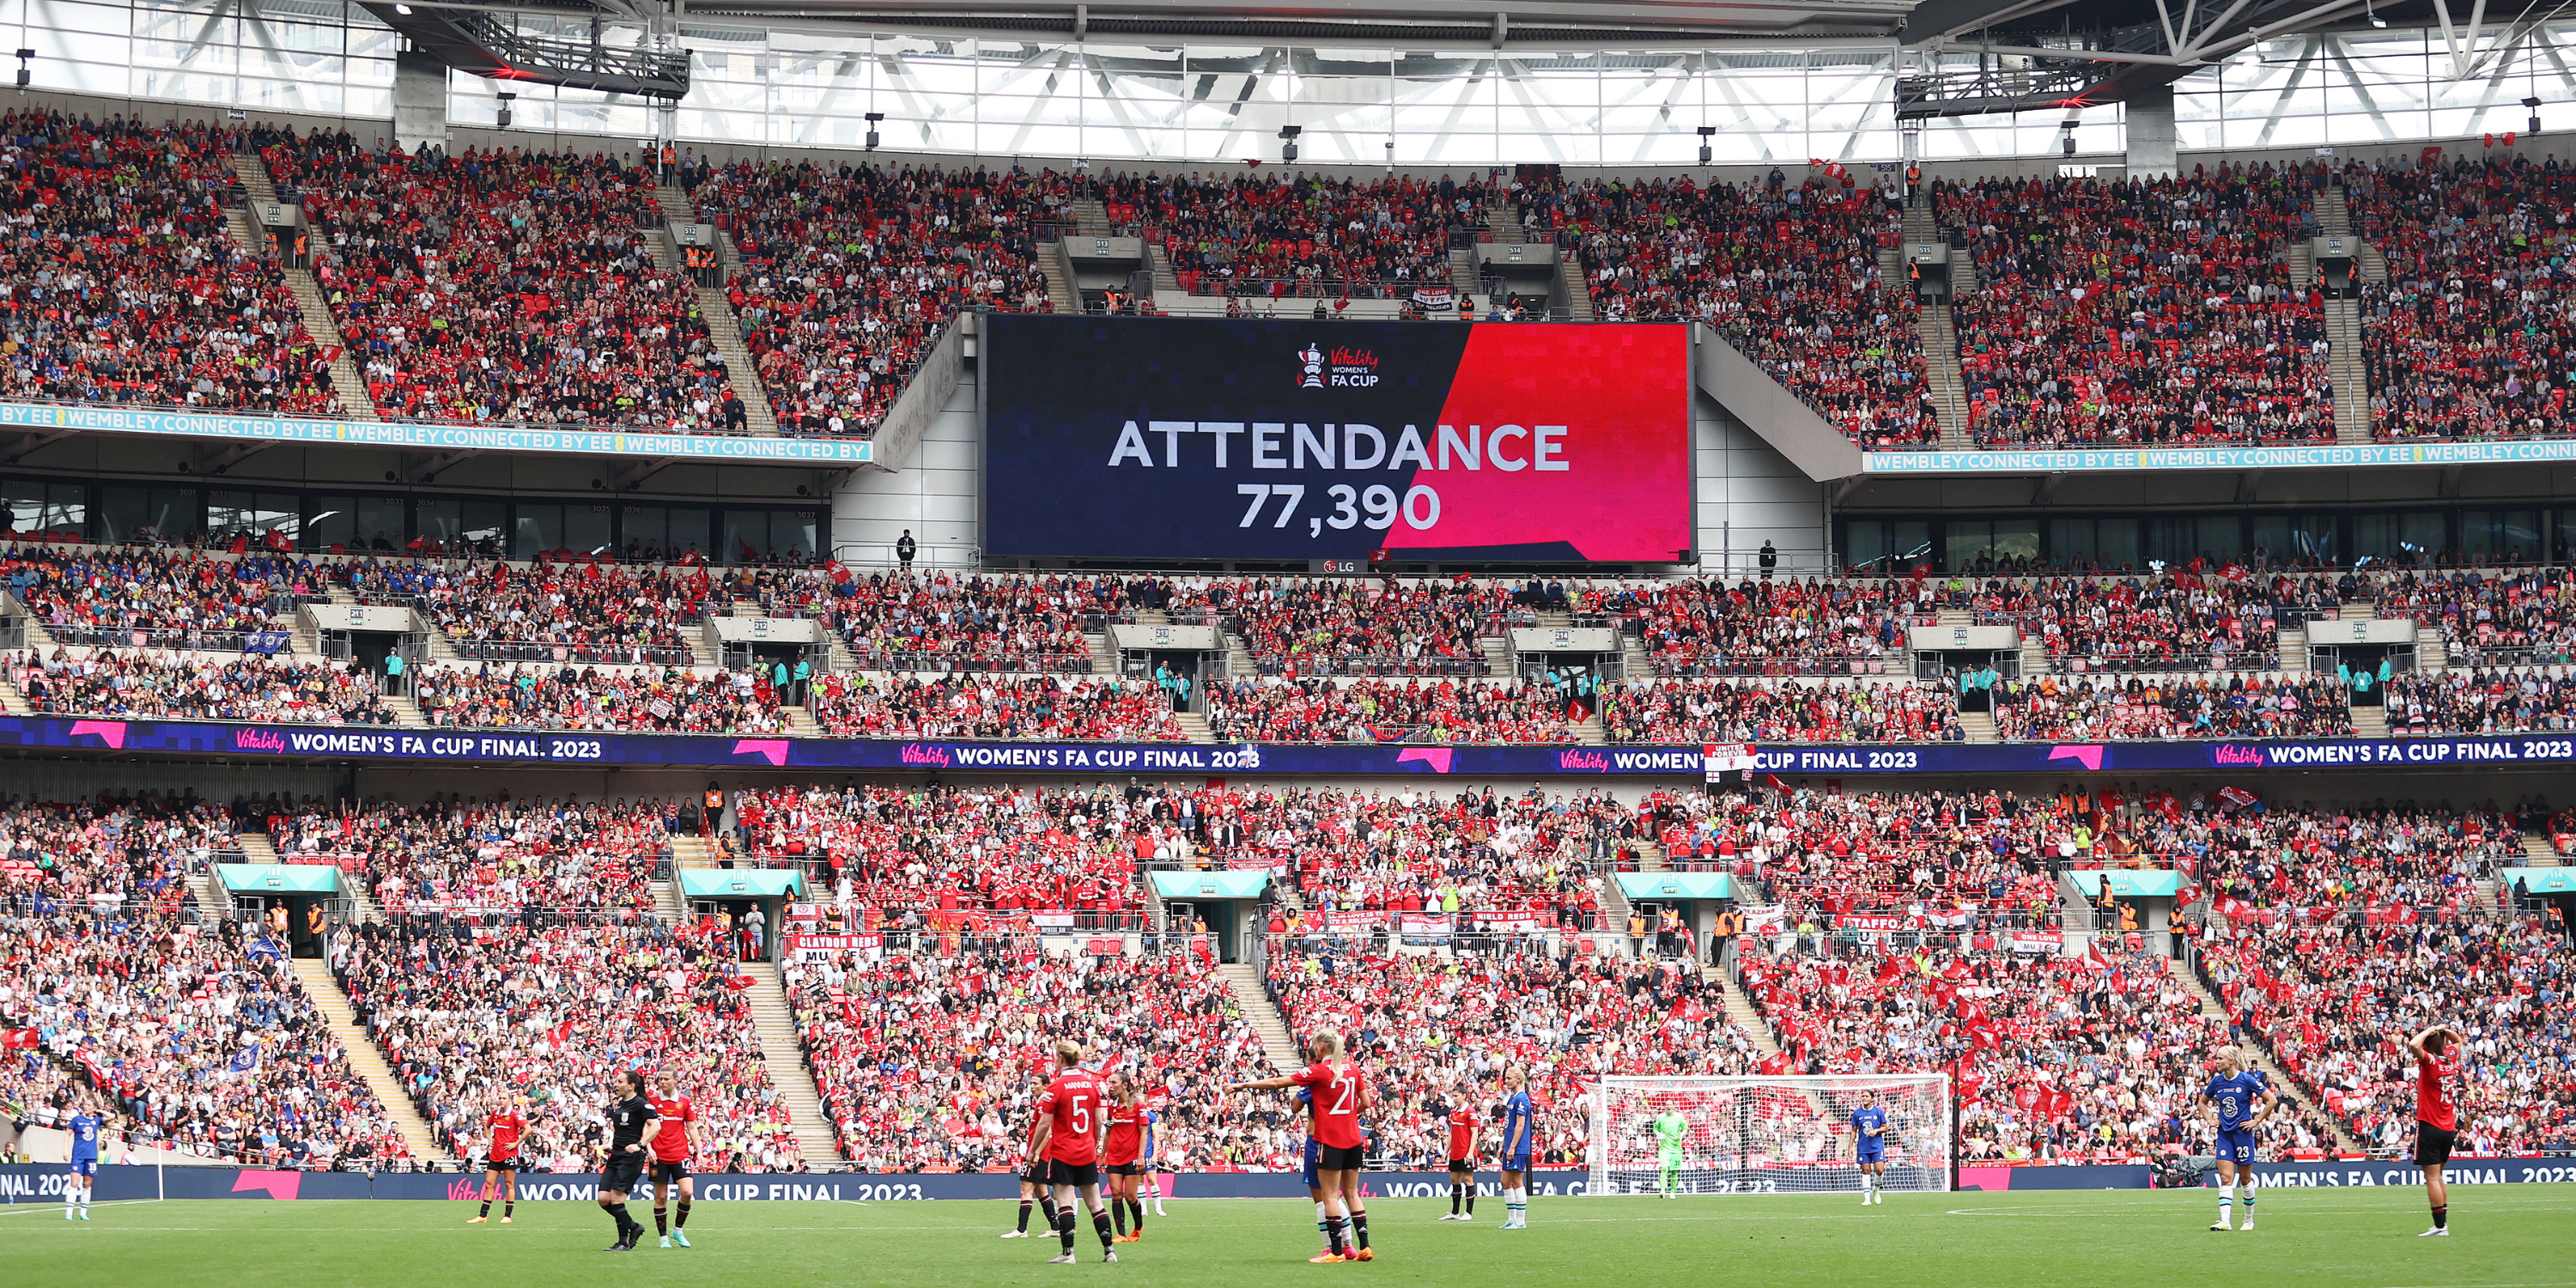 A world record attendance for a domestic women's football match at the Women's FA Cup Final